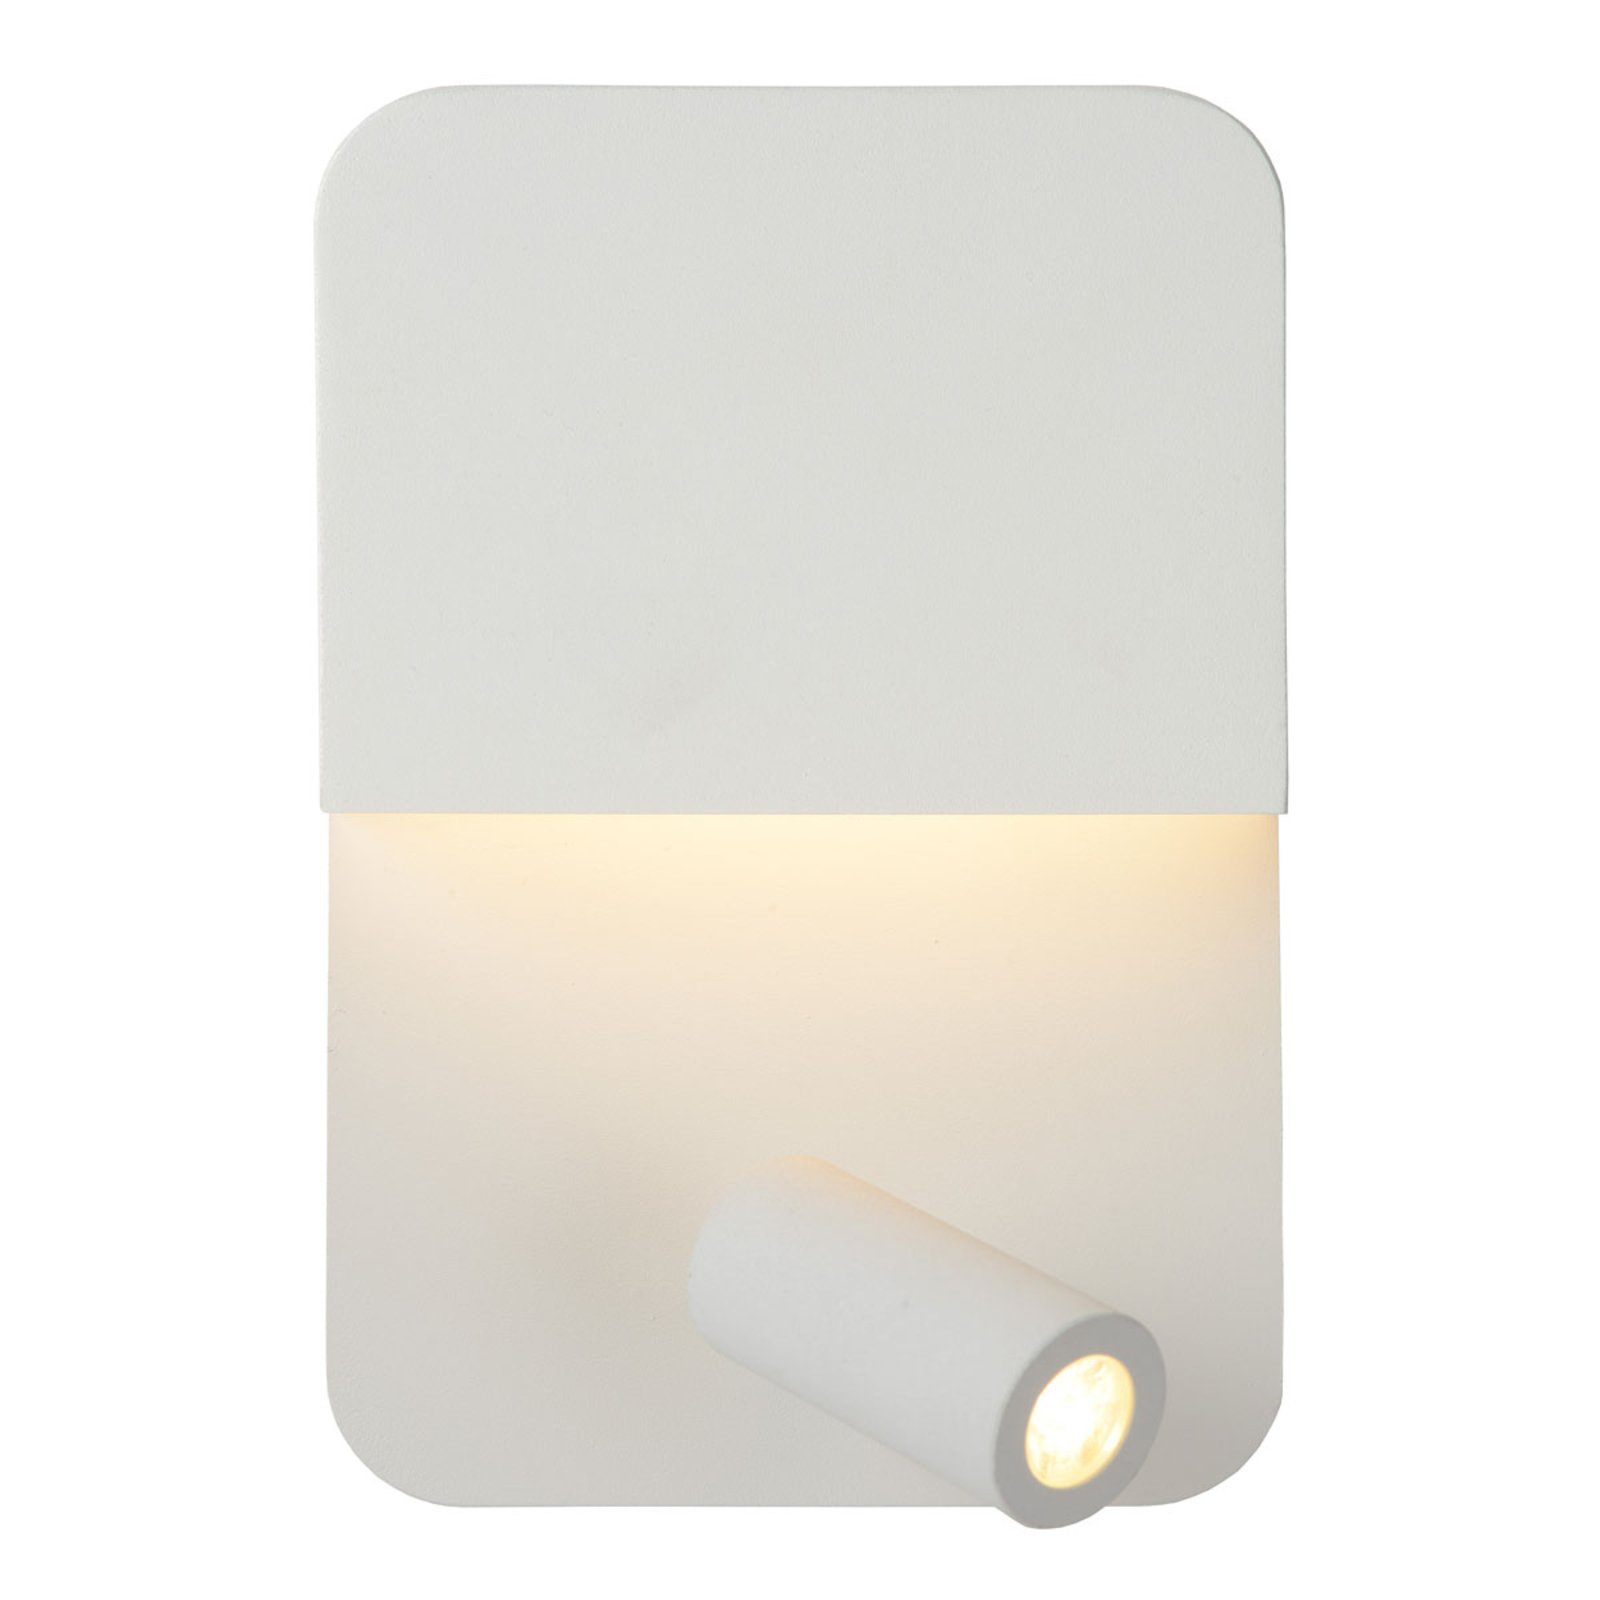 Boxer LED wall light with spot, white